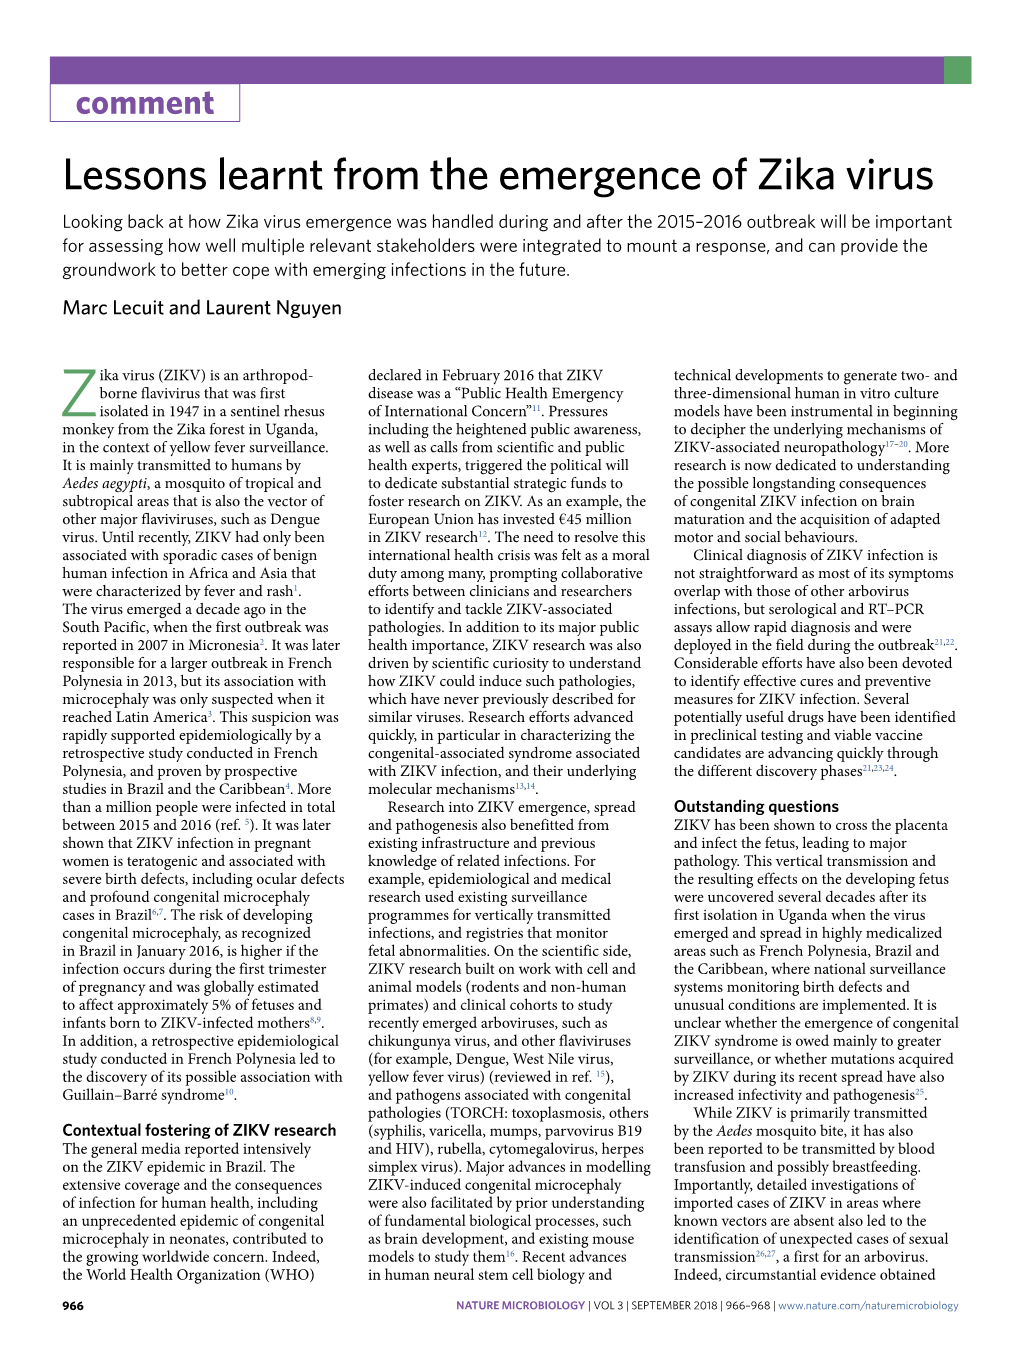 Lessons Learnt from the Emergence of Zika Virus